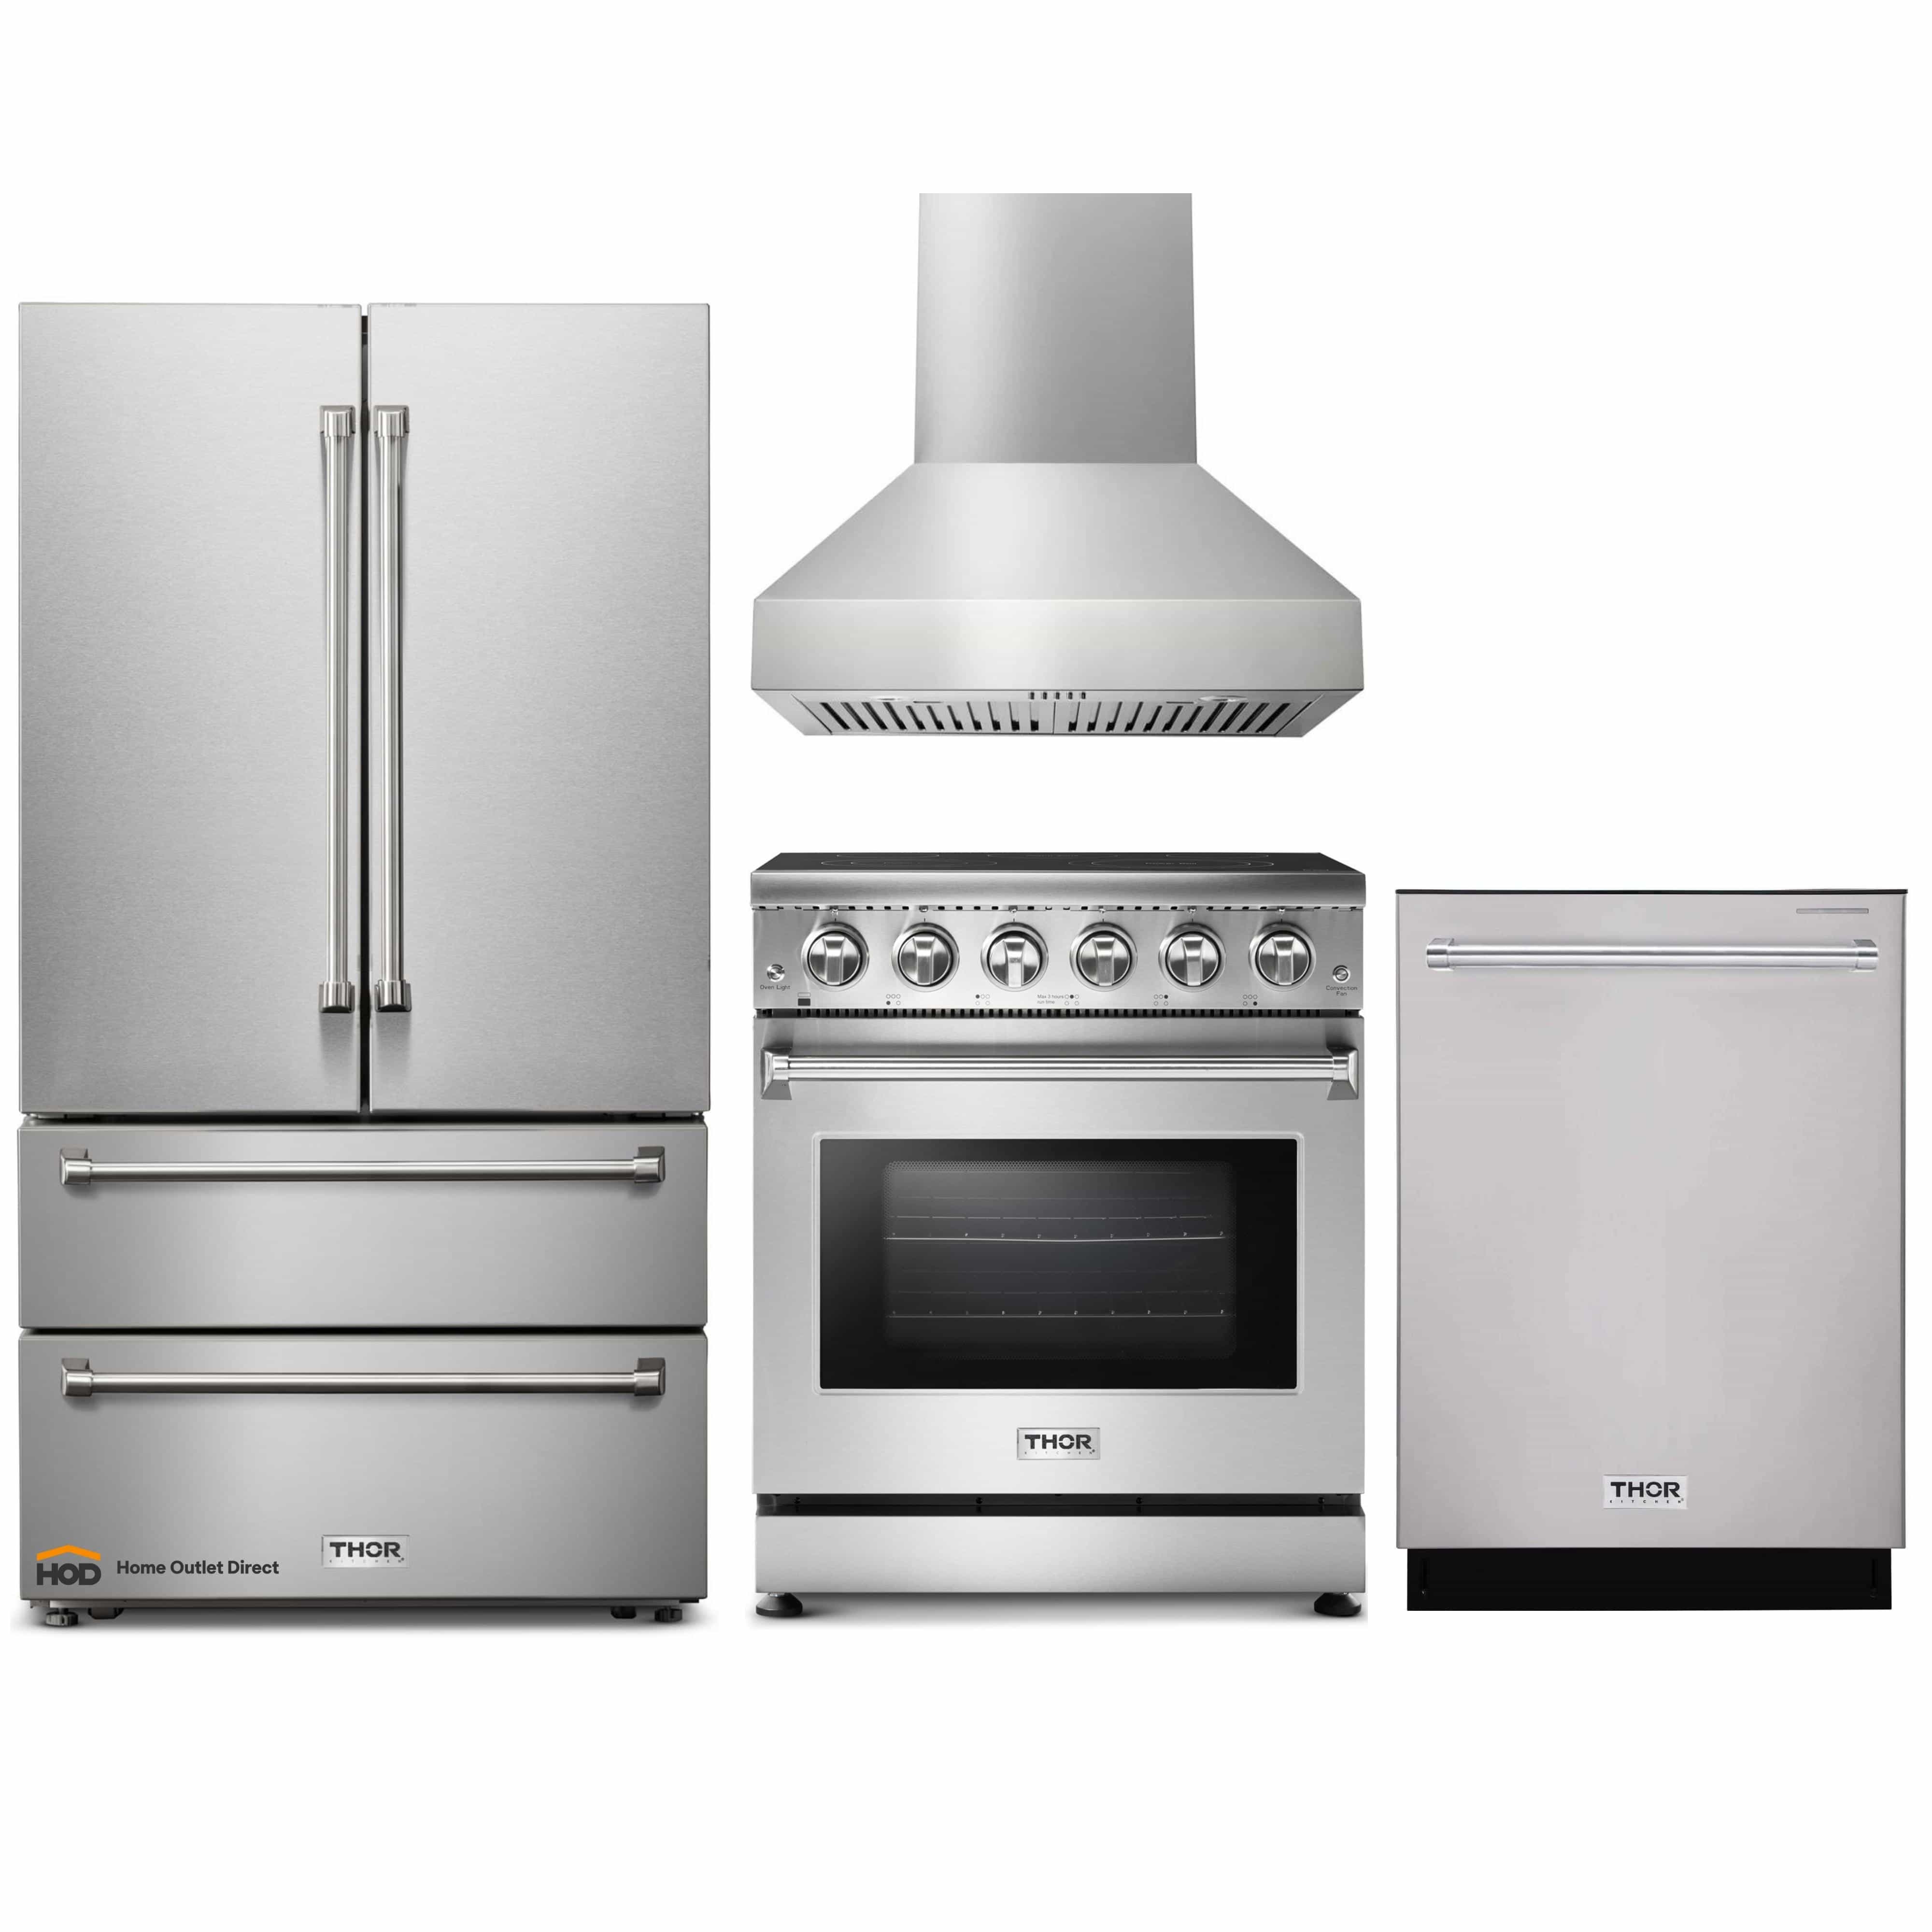 Thor Kitchen 4-Piece Appliance Package - 30-Inch Electric Range, French Door Refrigerator, Pro-Style Wall Mount Hood, and Dishwasher in Stainless Steel